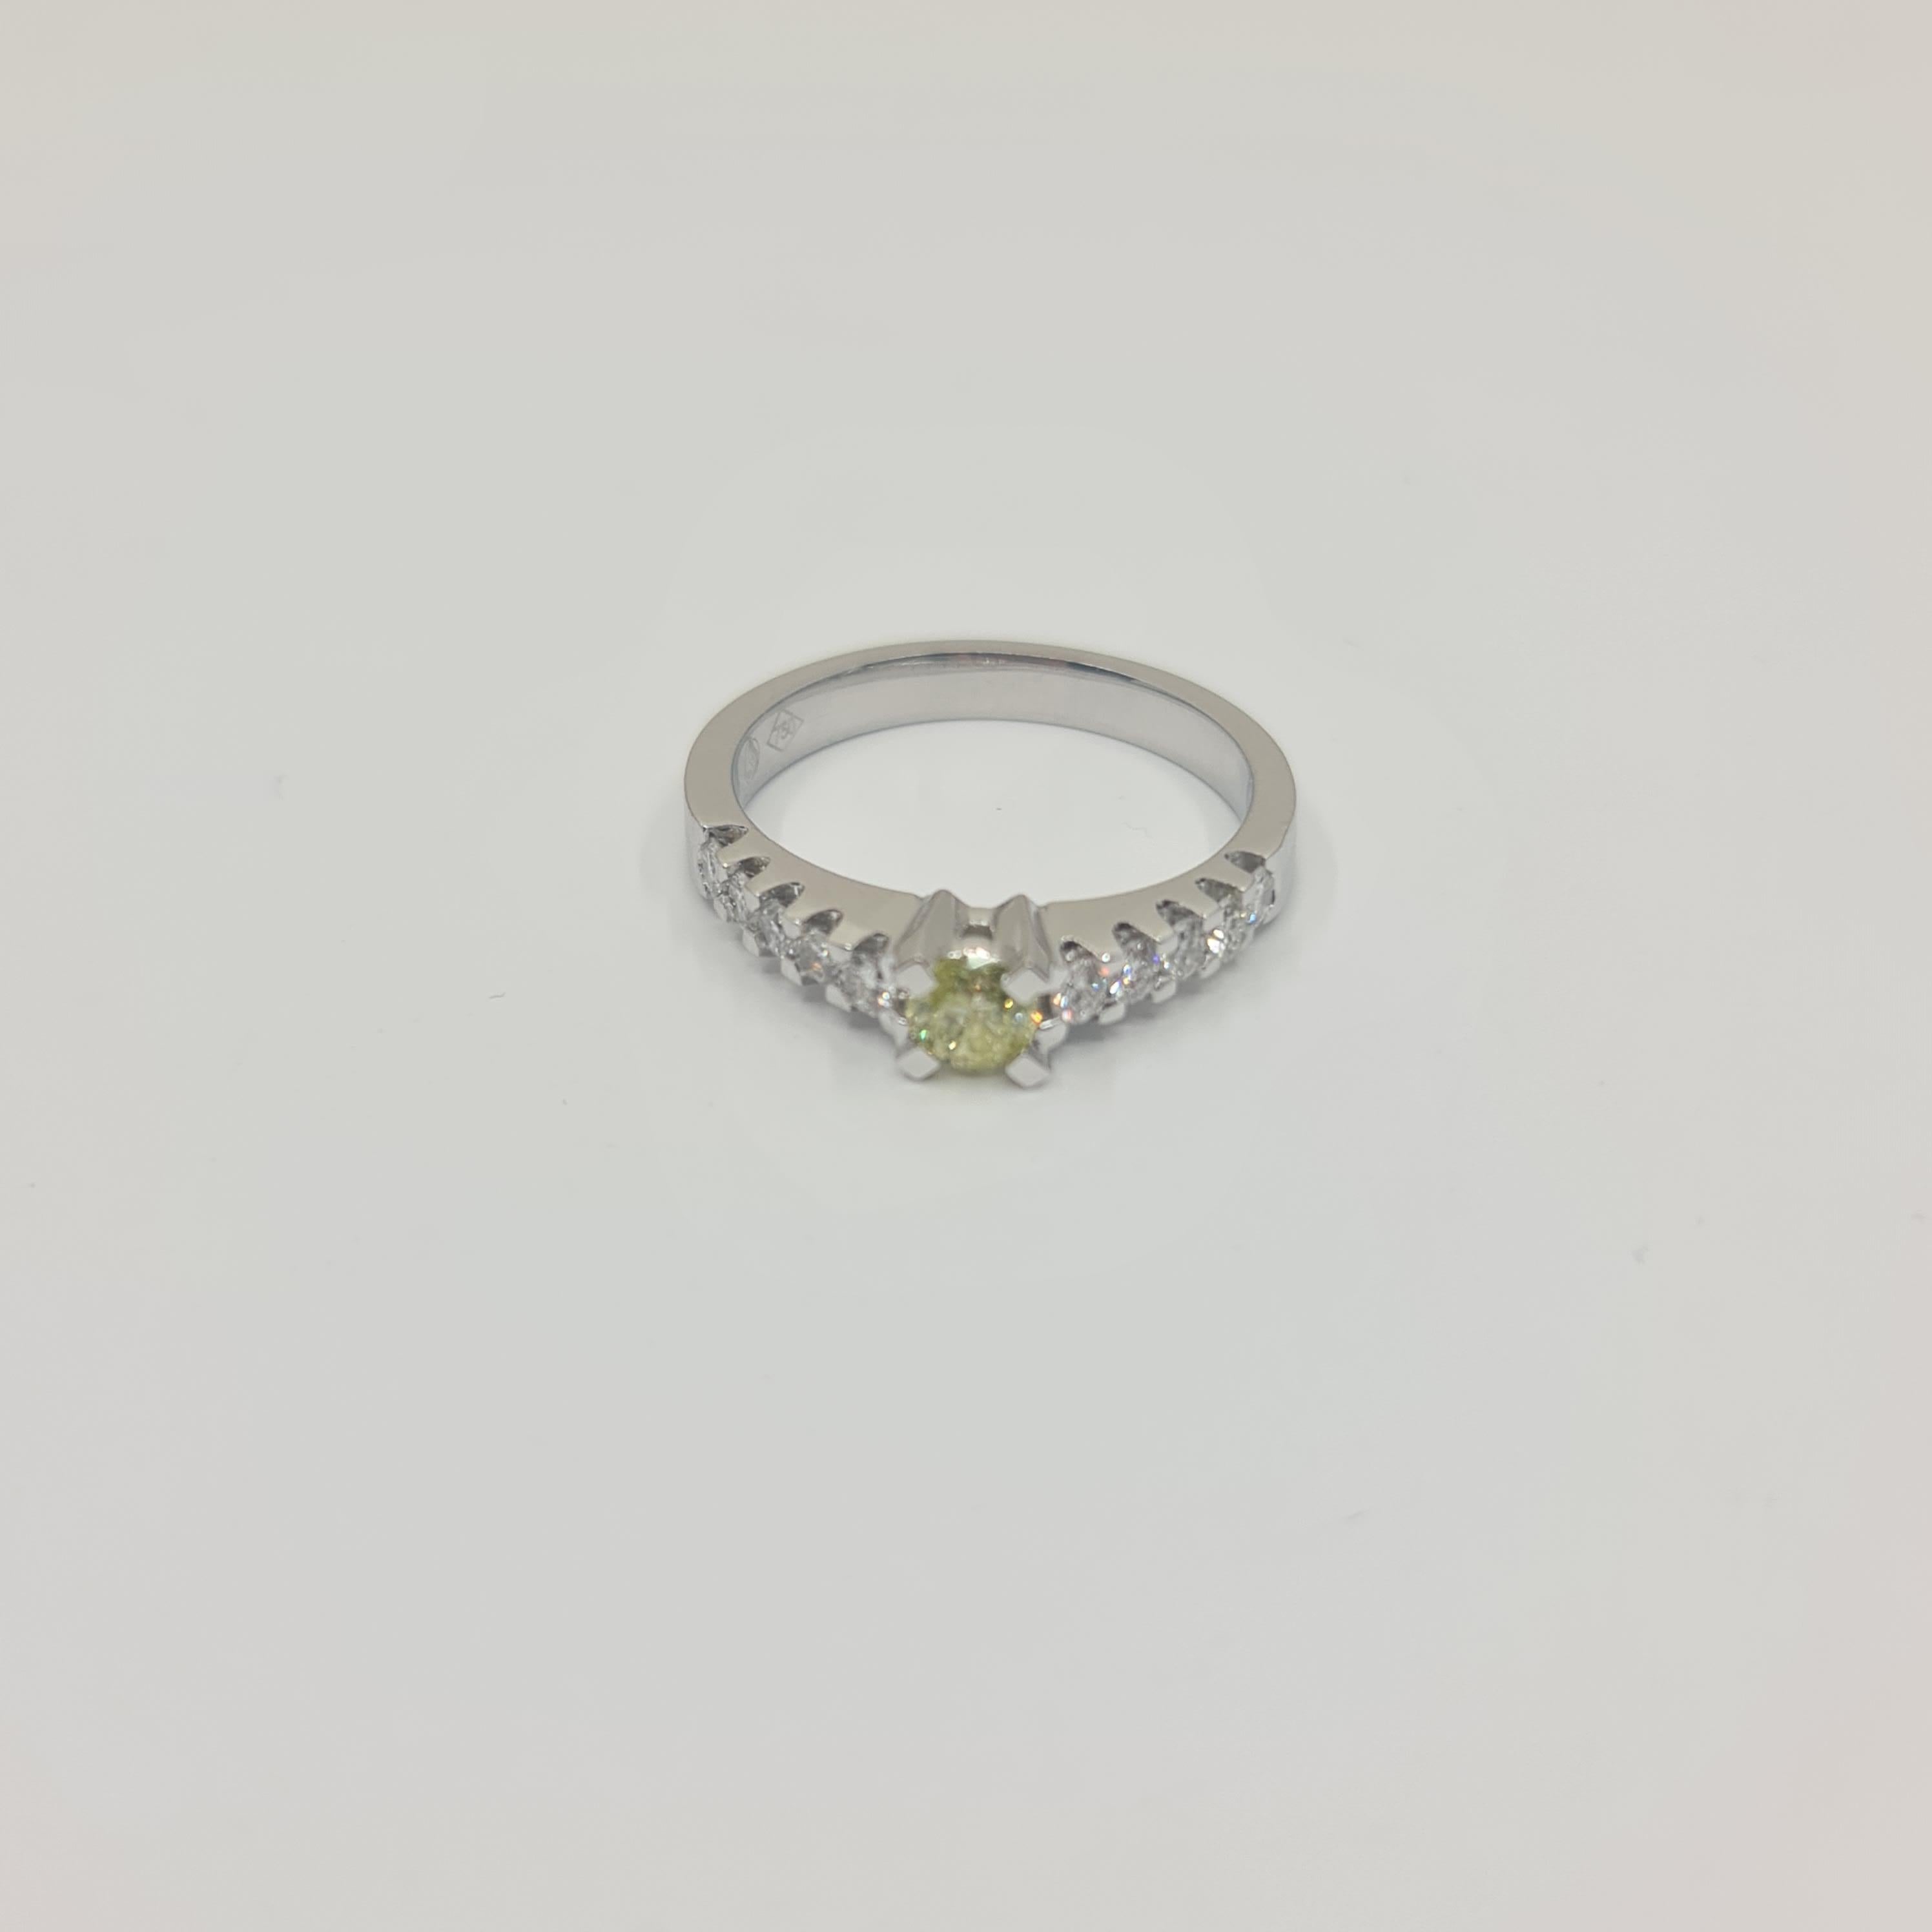 Exquisite Solitaire Diamond Ring 0.28 Carat Fancy Green Brilliant 

Total Diamonds 0.63 Carat(Sidestones: 0.35 Carat).

Unique, 18k Whitegold Ring with Fancy Green(Treated Color) Center Diamond in Brilliant Cut and Diamond Side Stones 0.35 Carat